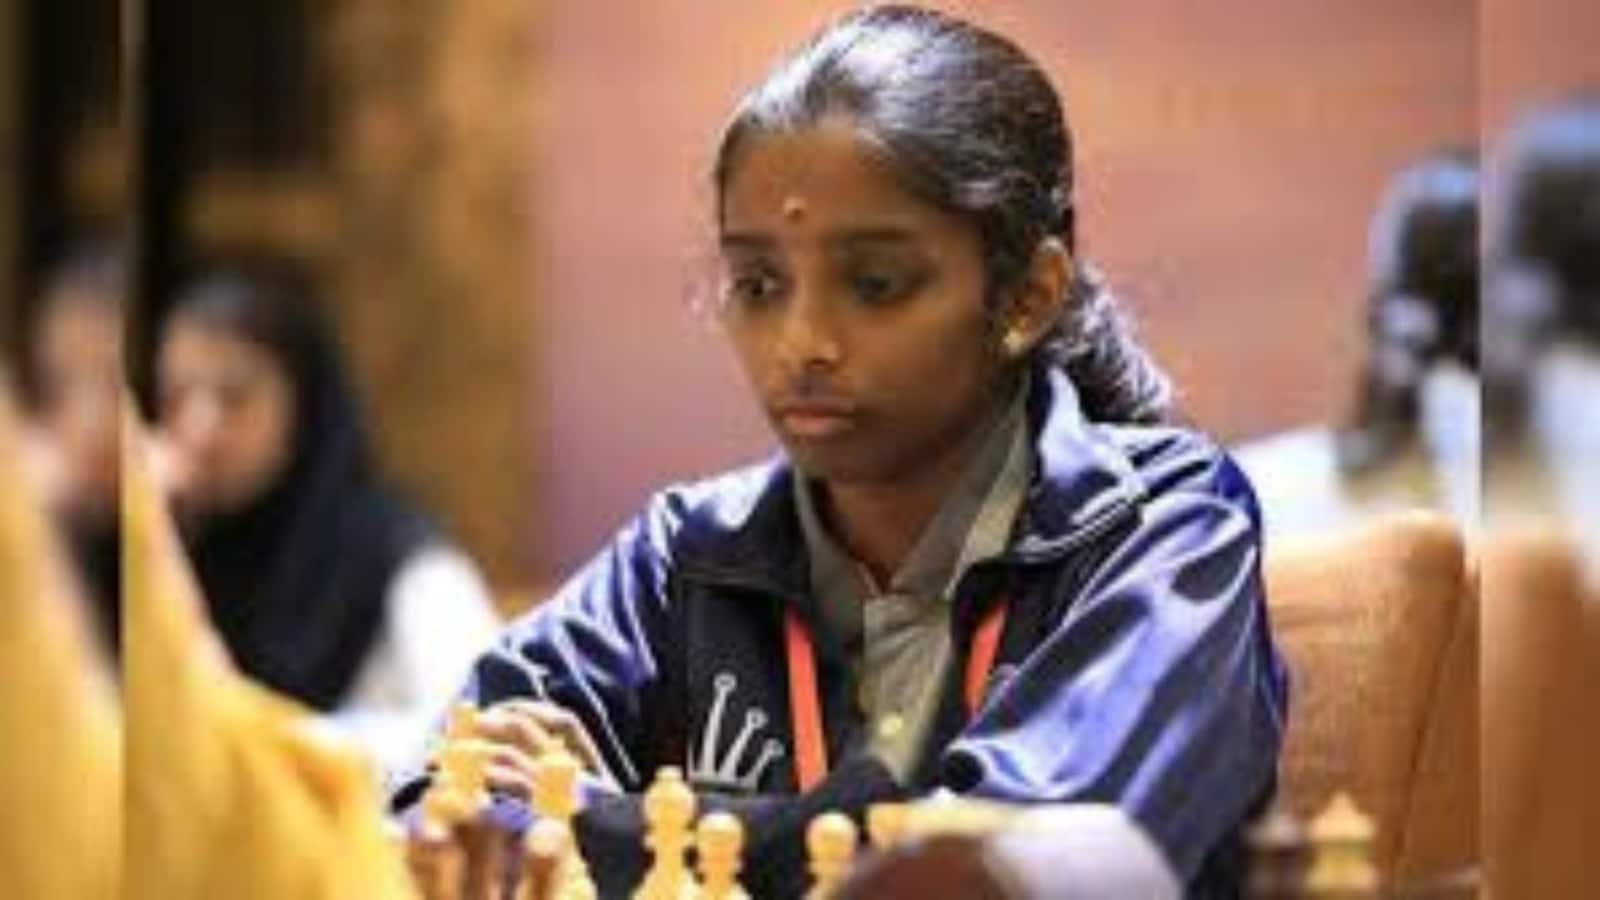 Indian women's chess waits to take off - Hindustan Times